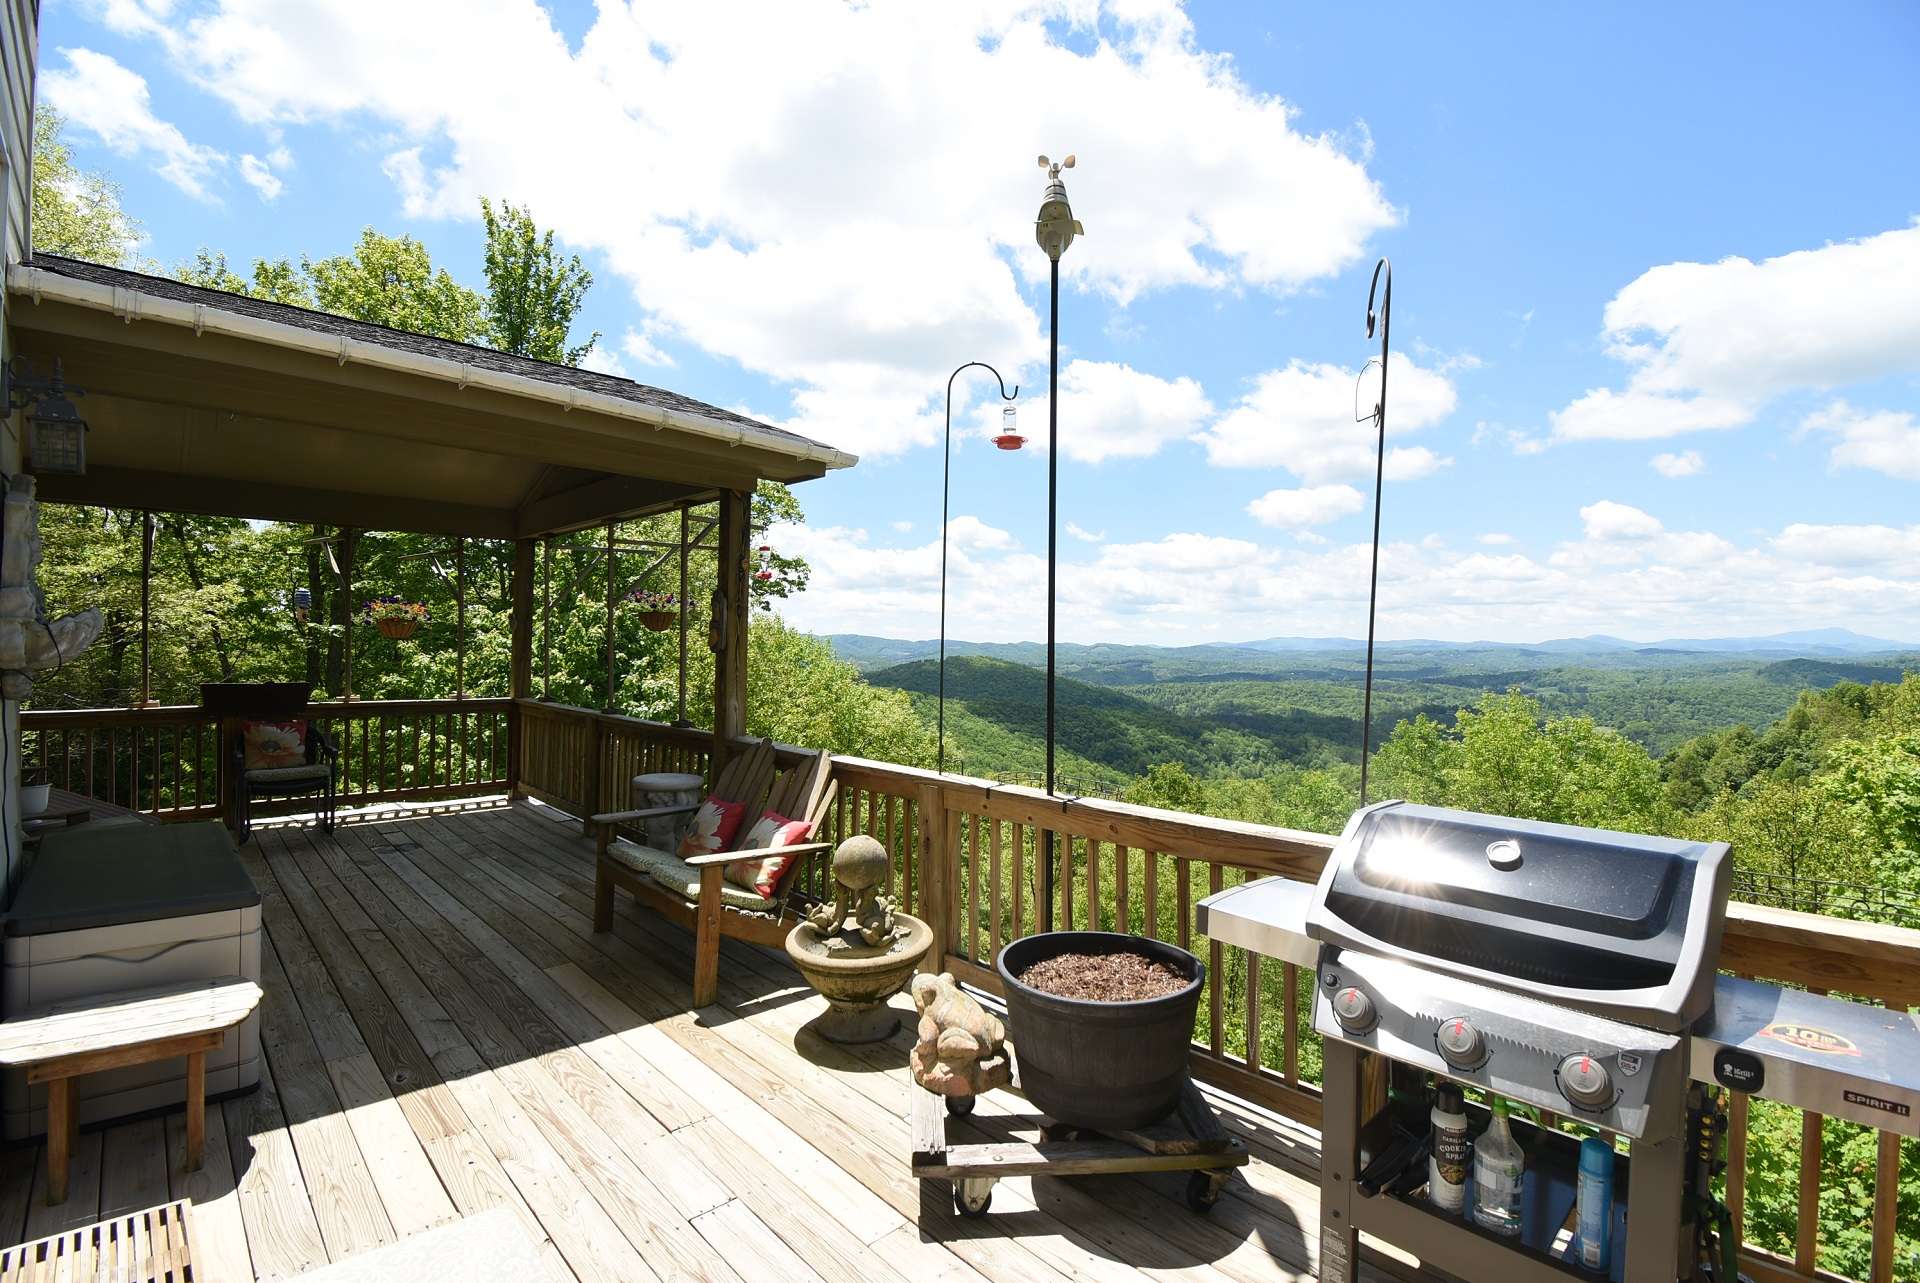 Tremendous long-range views of Grandfather Mountain and distant ski slopes await you here on the partially covered back deck.